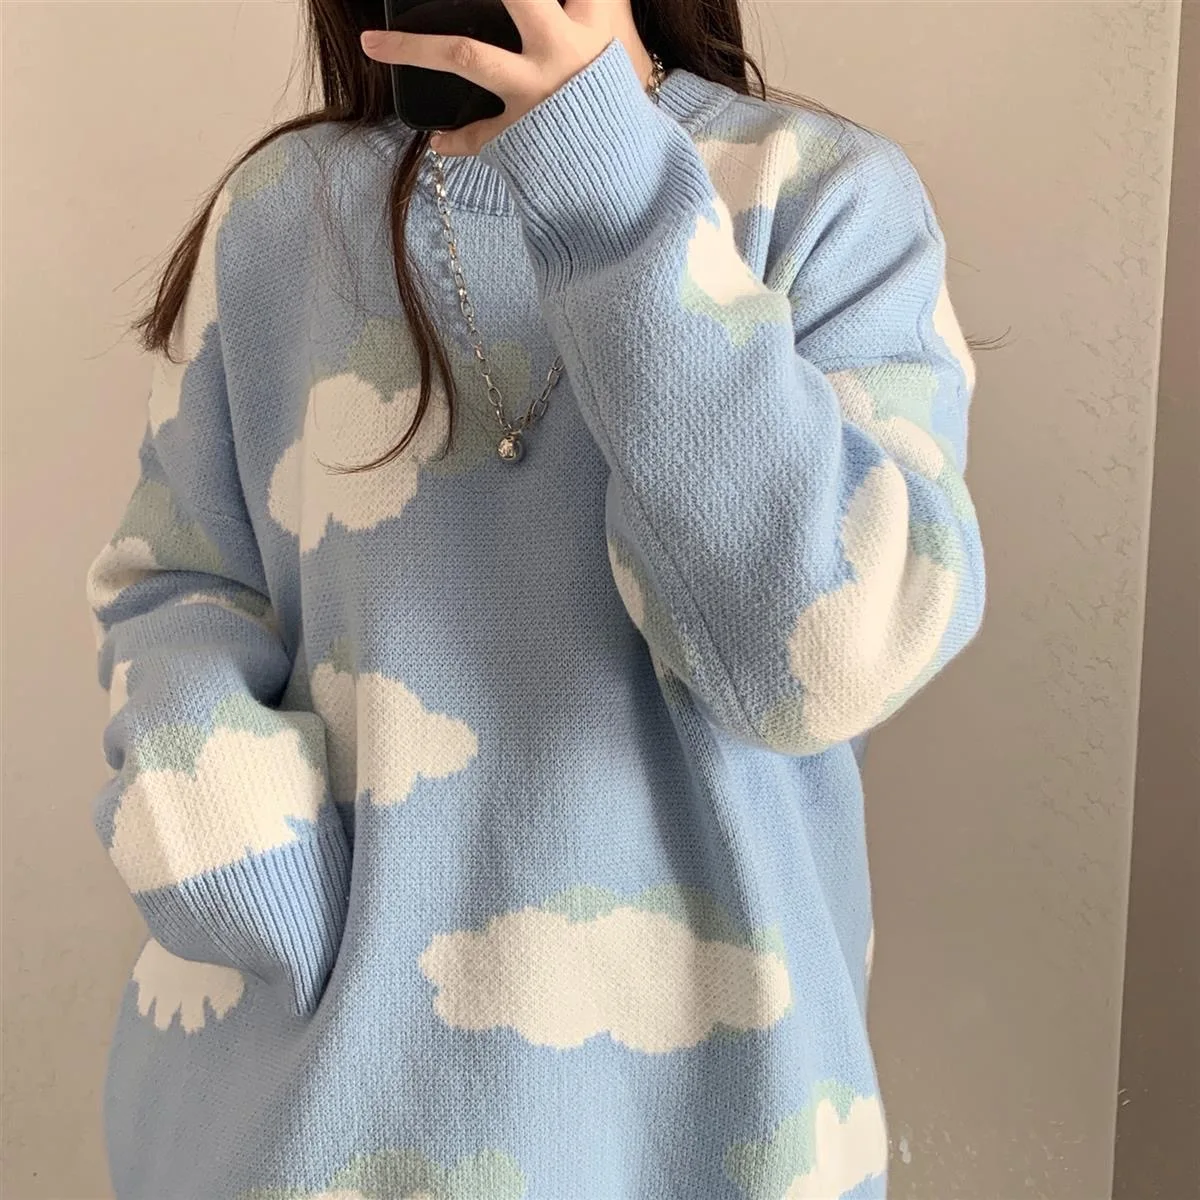 

Sweaters Female Harajuku Lovely Chic Preppy Simple Soft Loose Autumn Spring Teens Knitwear Casual Fashion Korean Girls Pullover